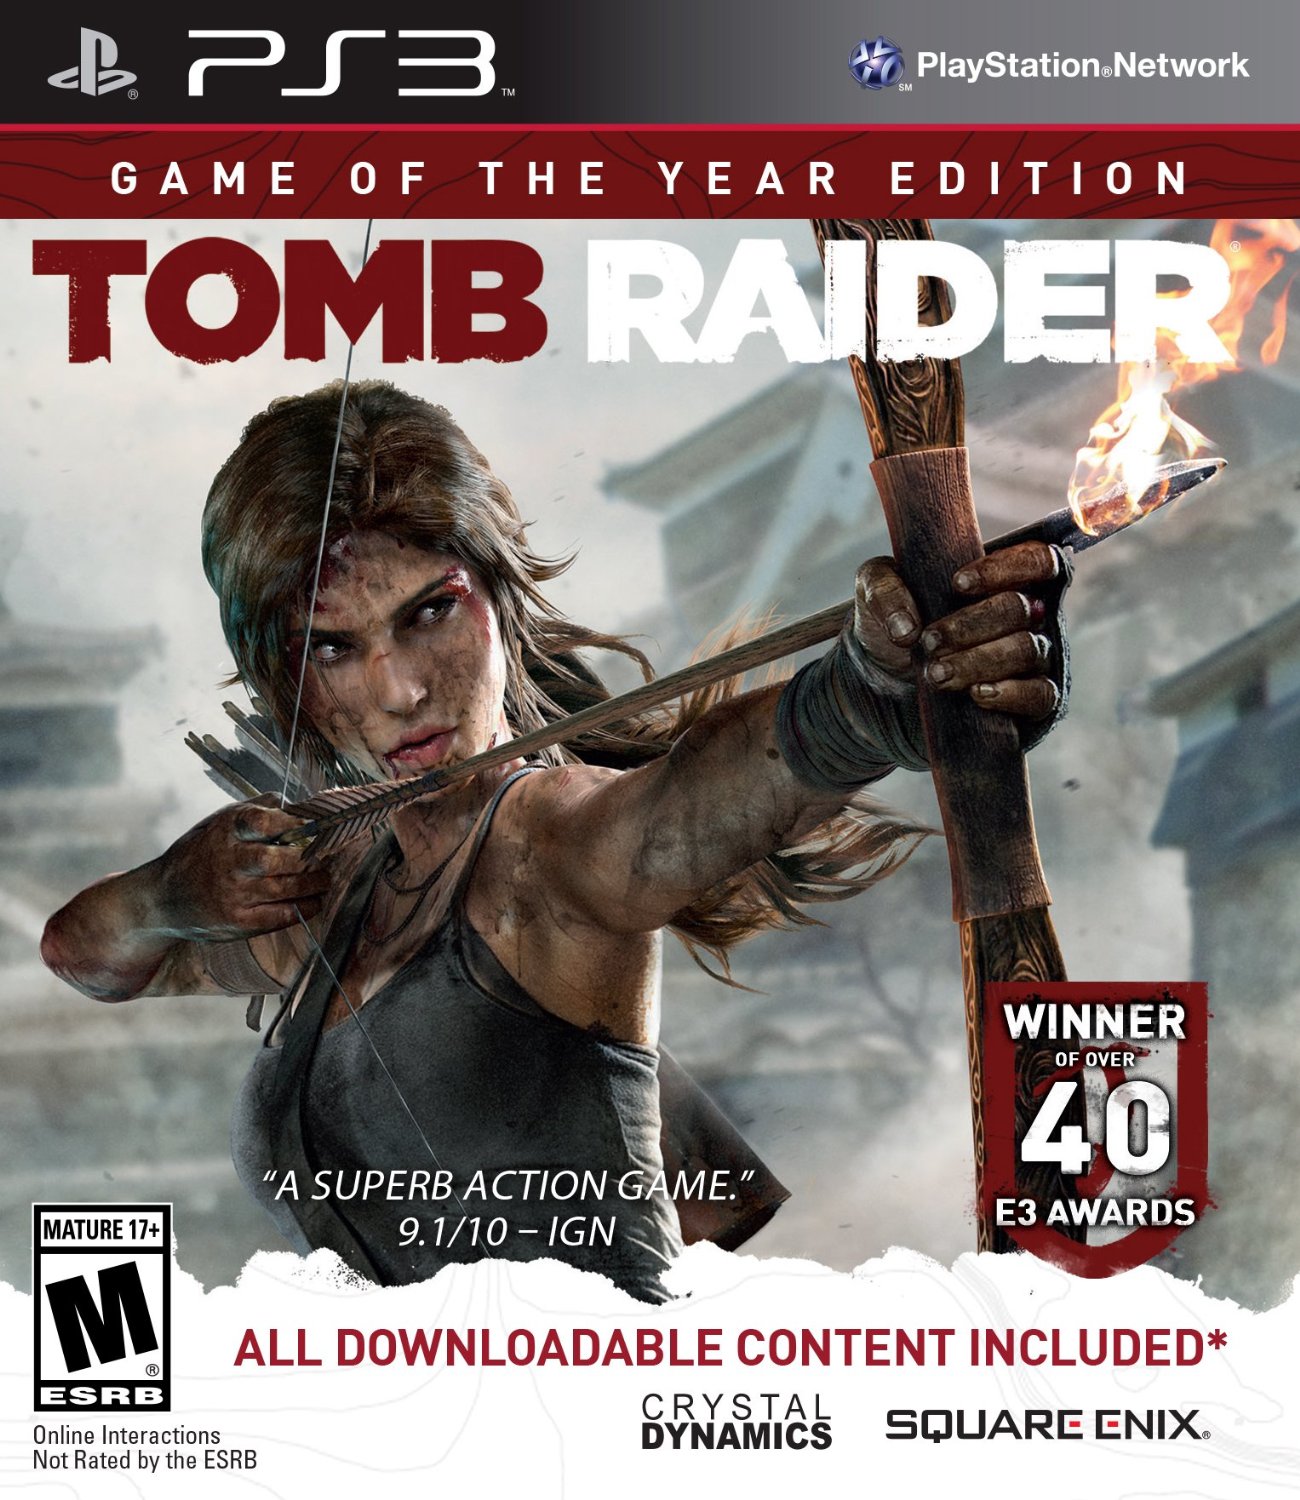 PS3 Winner - Game of the Year 2013 